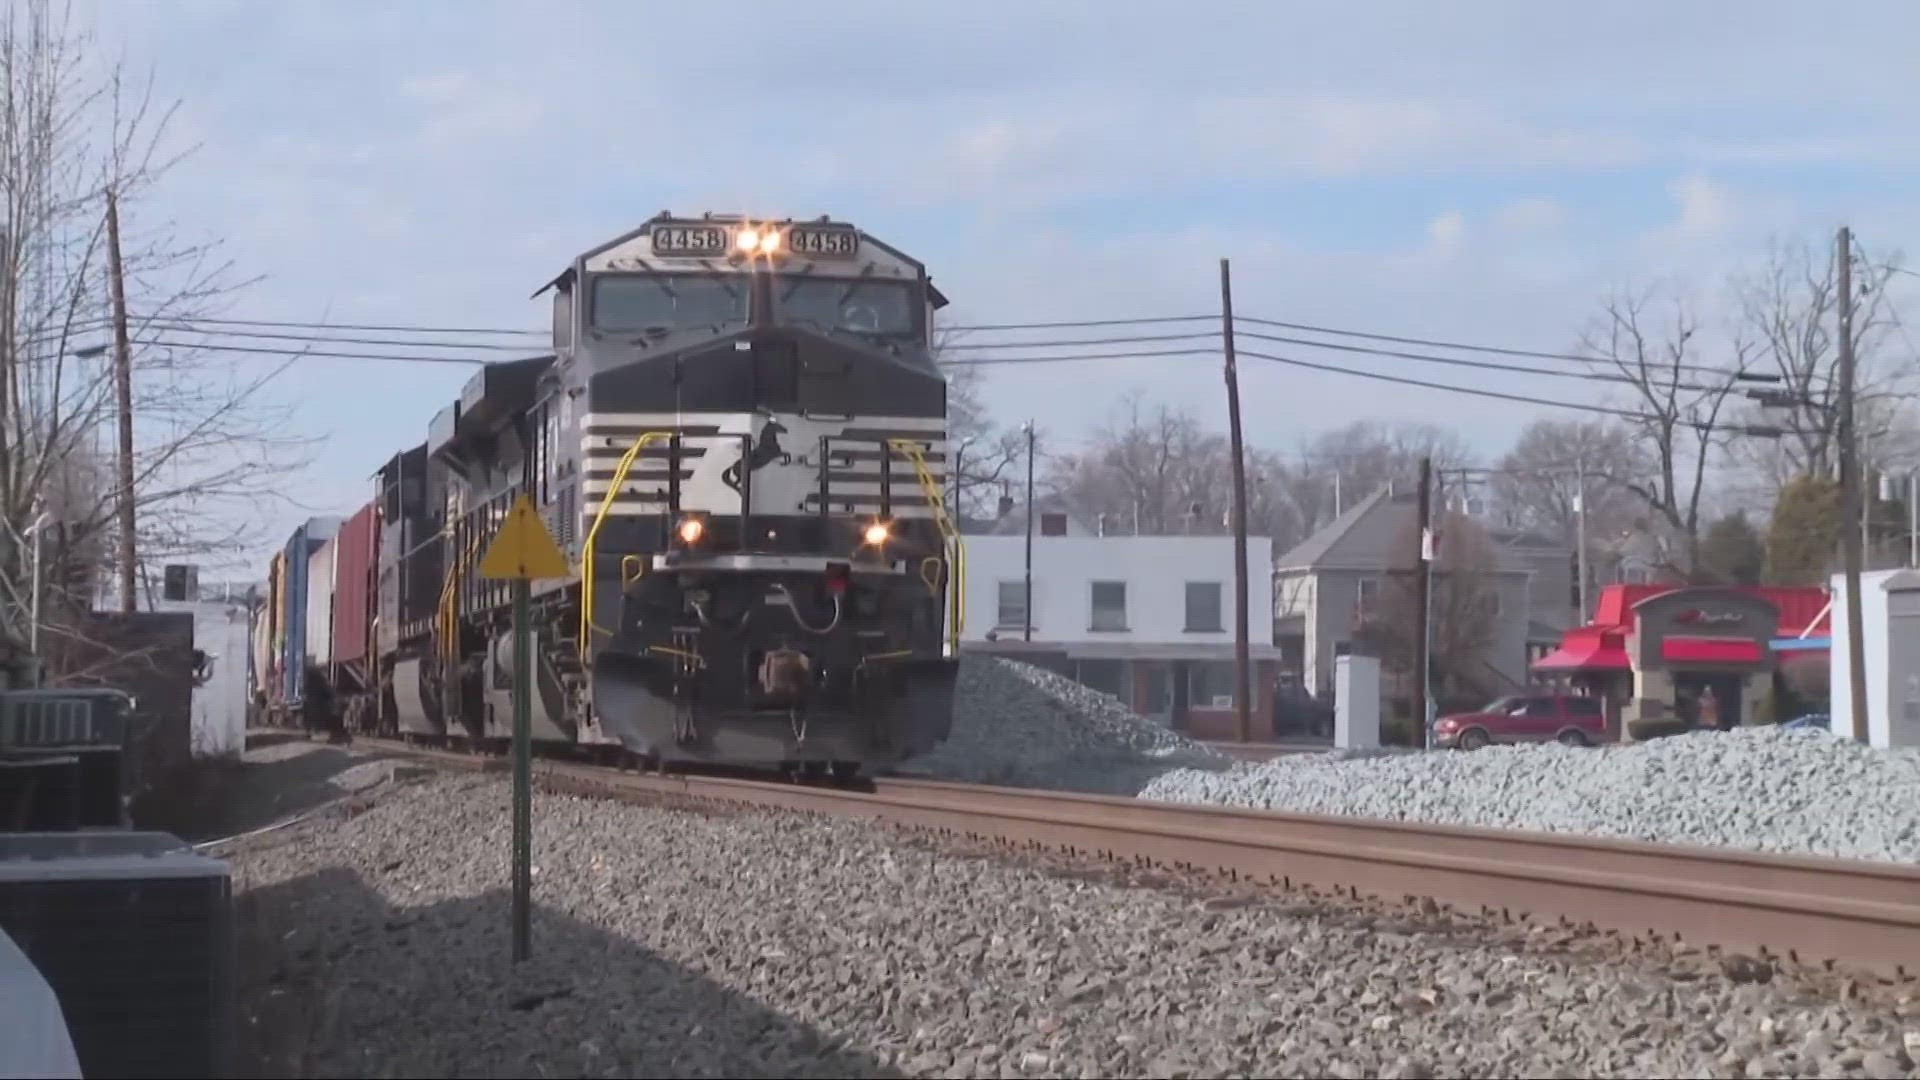 The meeting comes after new rail safety legislation was introduced in Cleveland.